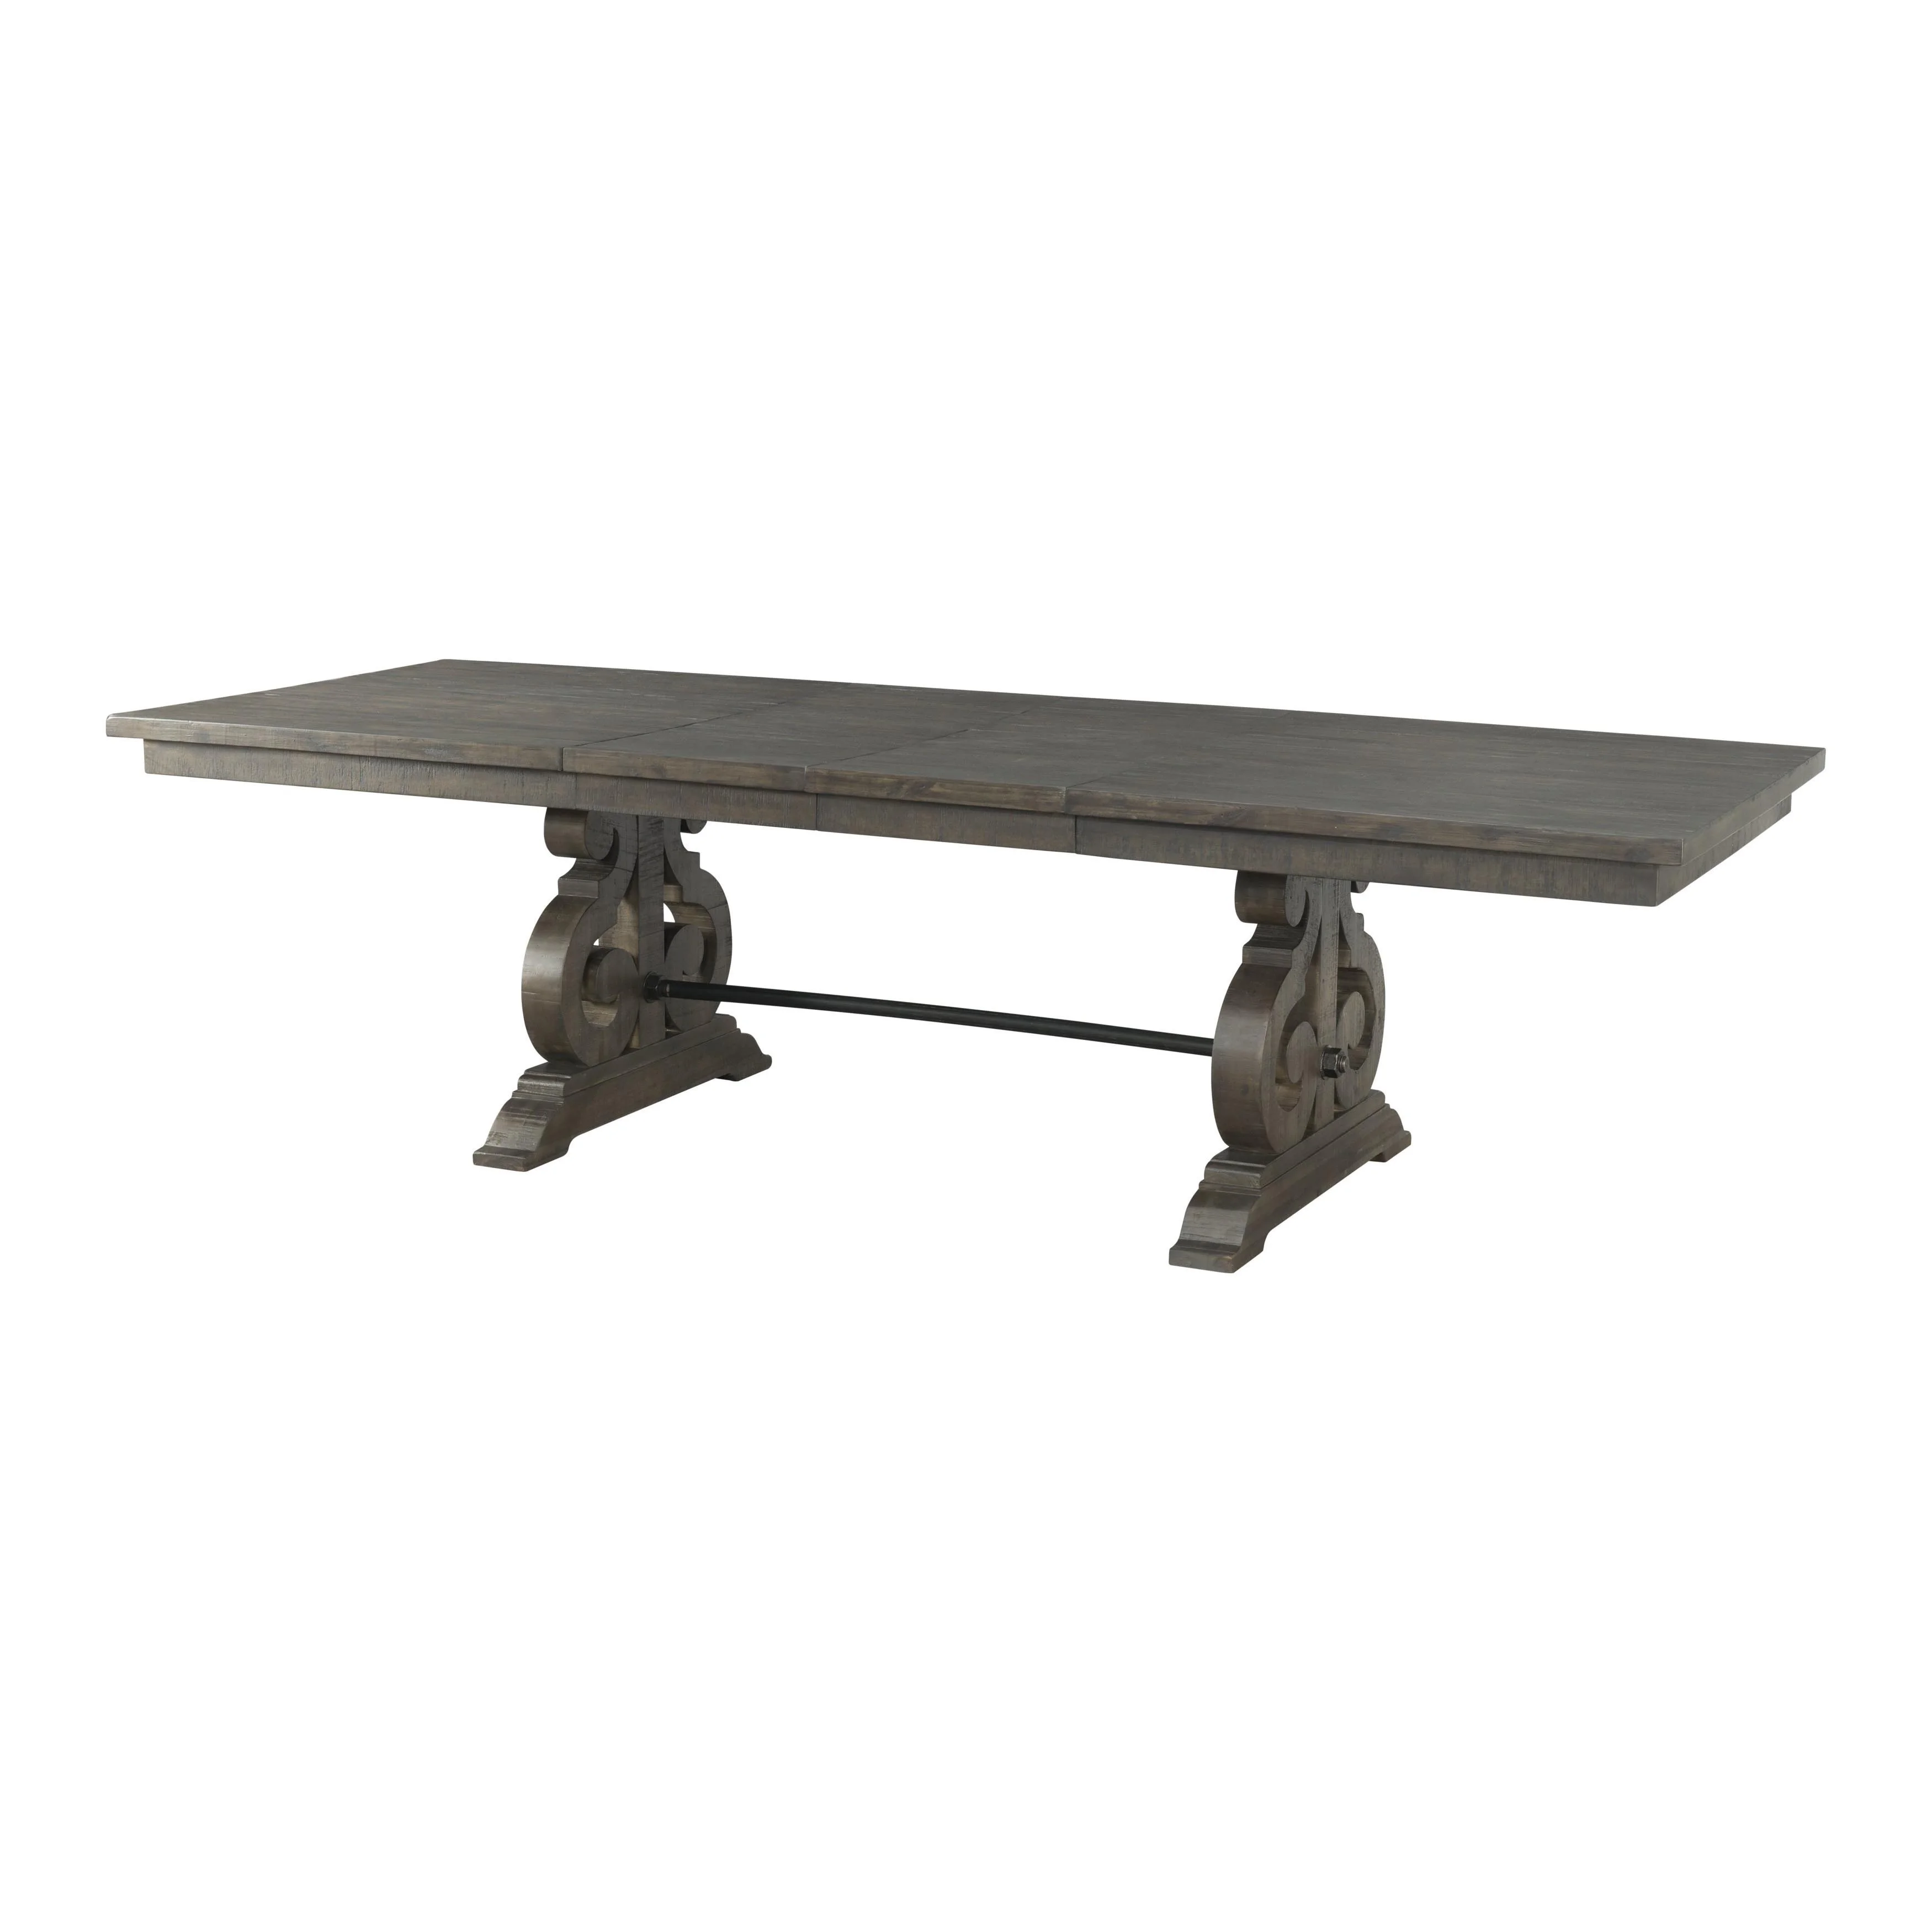 Gracewood Hollow Puzo Contemporary Dining Table